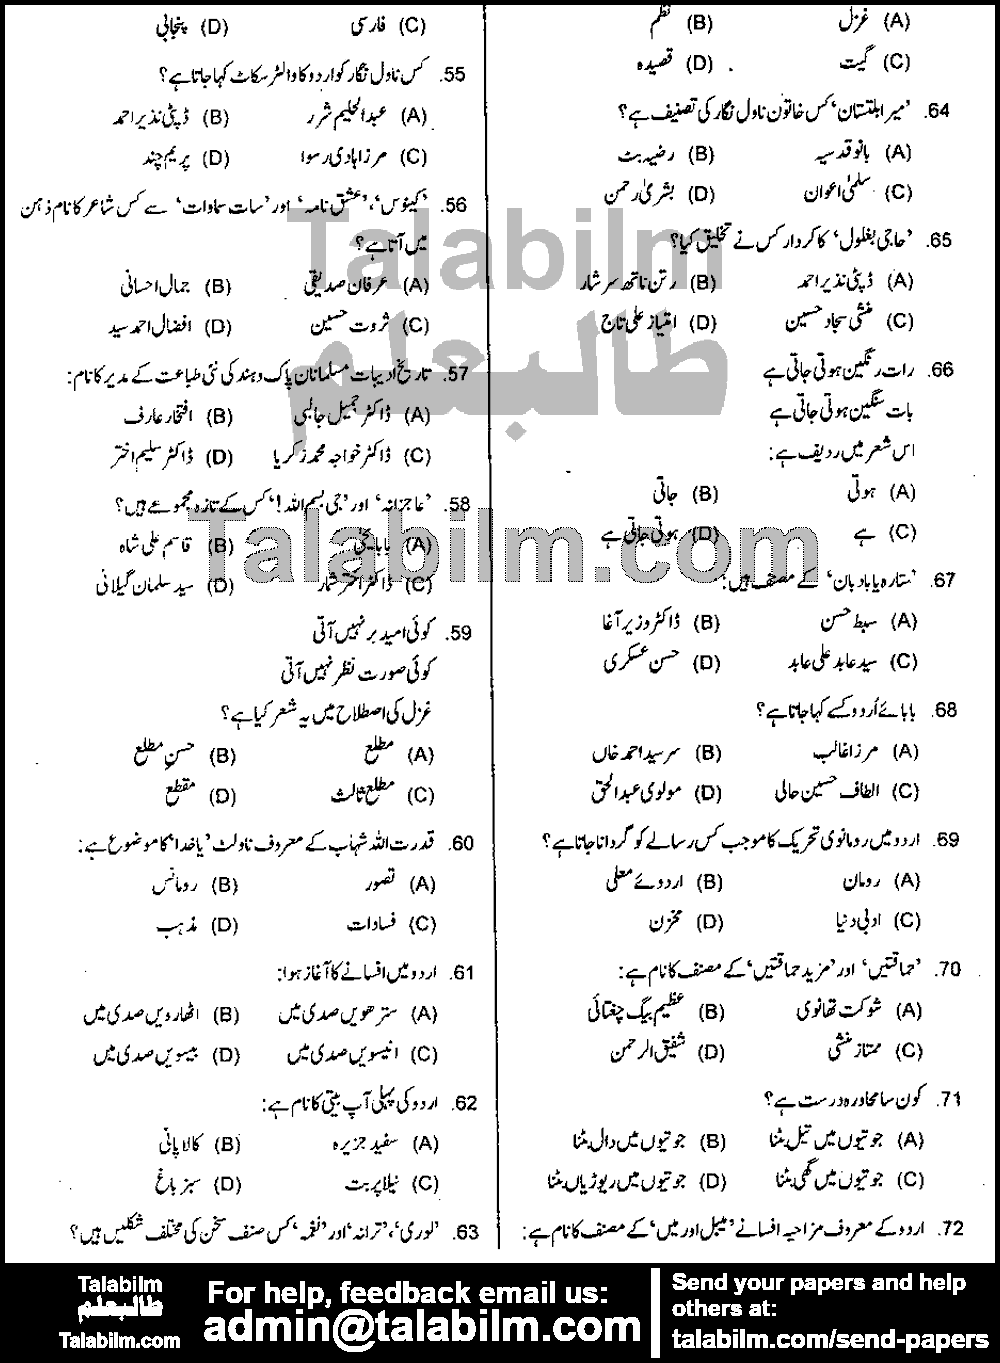 Urdu Elementary School Educator 0 past paper for 2019 Page No. 4